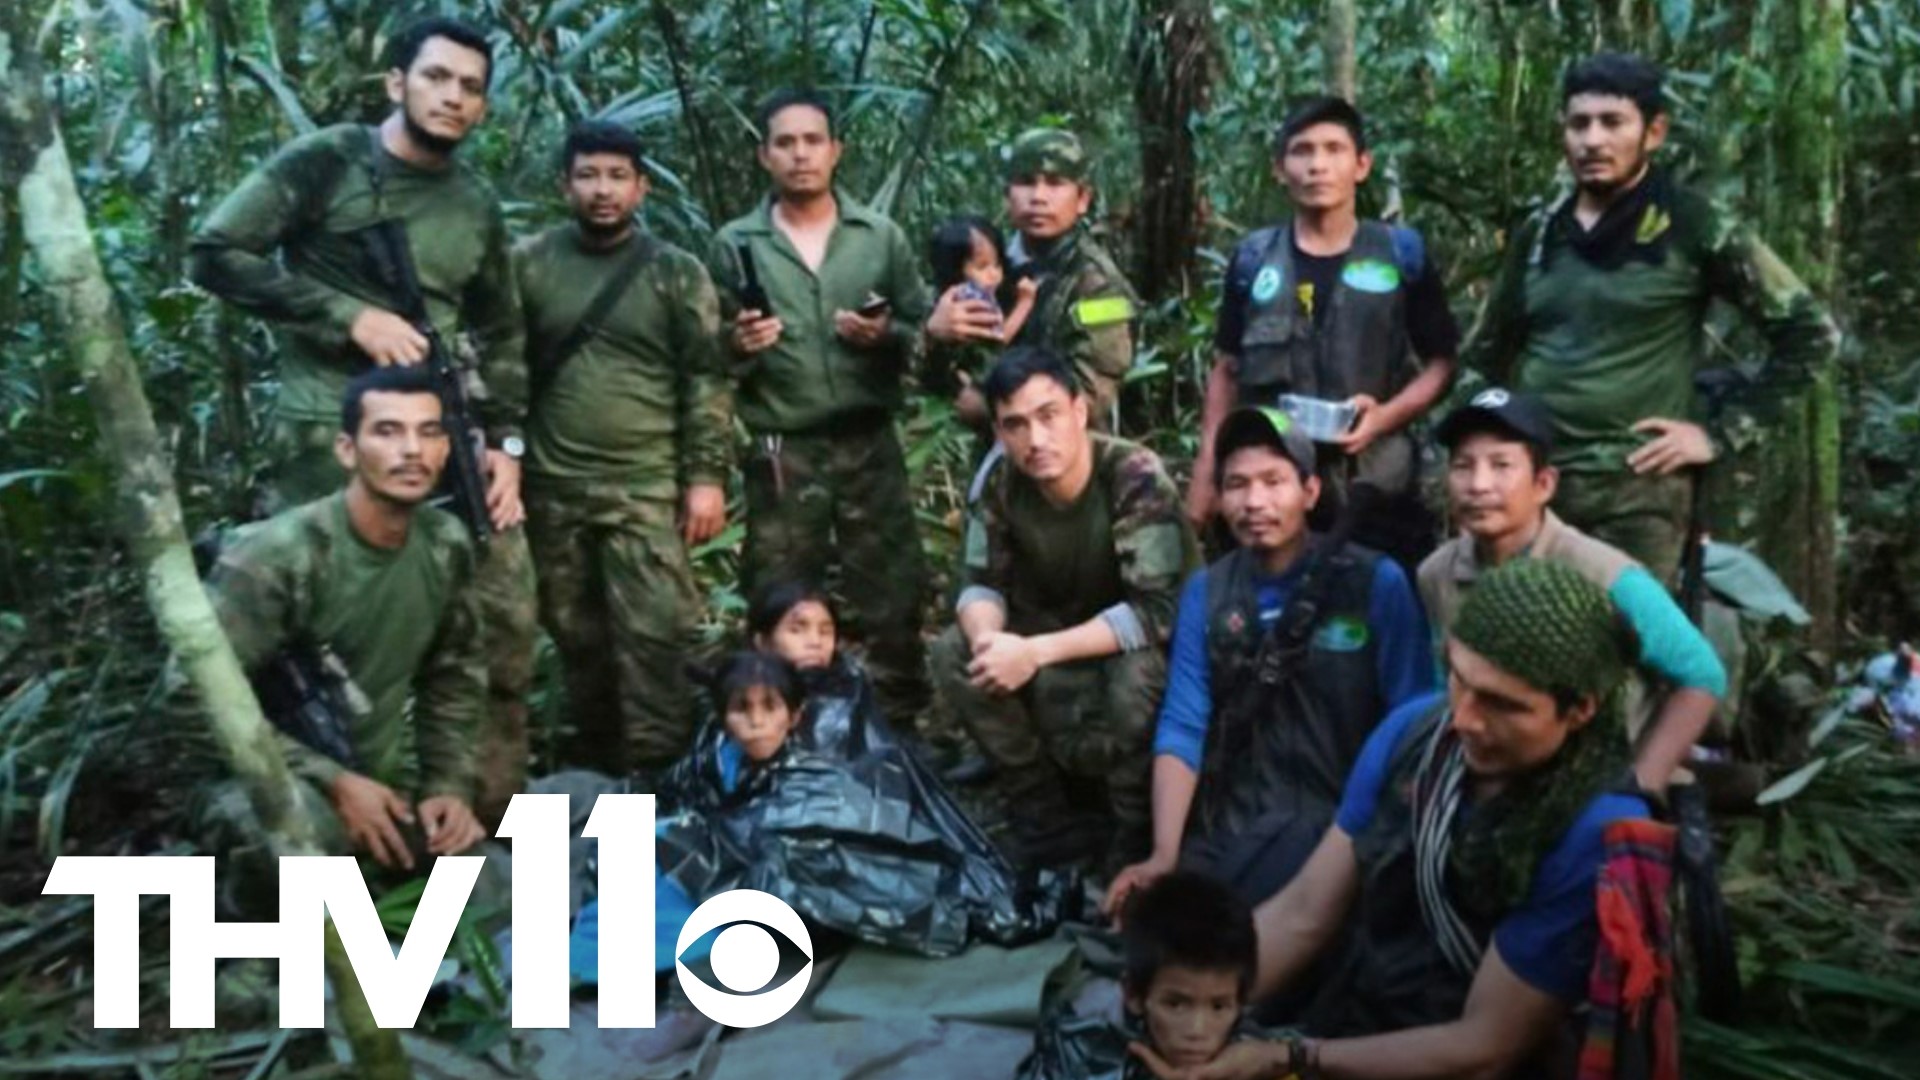 The children are members of the Huitoto people, and officials said the oldest children in the group had some knowledge of how to survive in the rainforest.